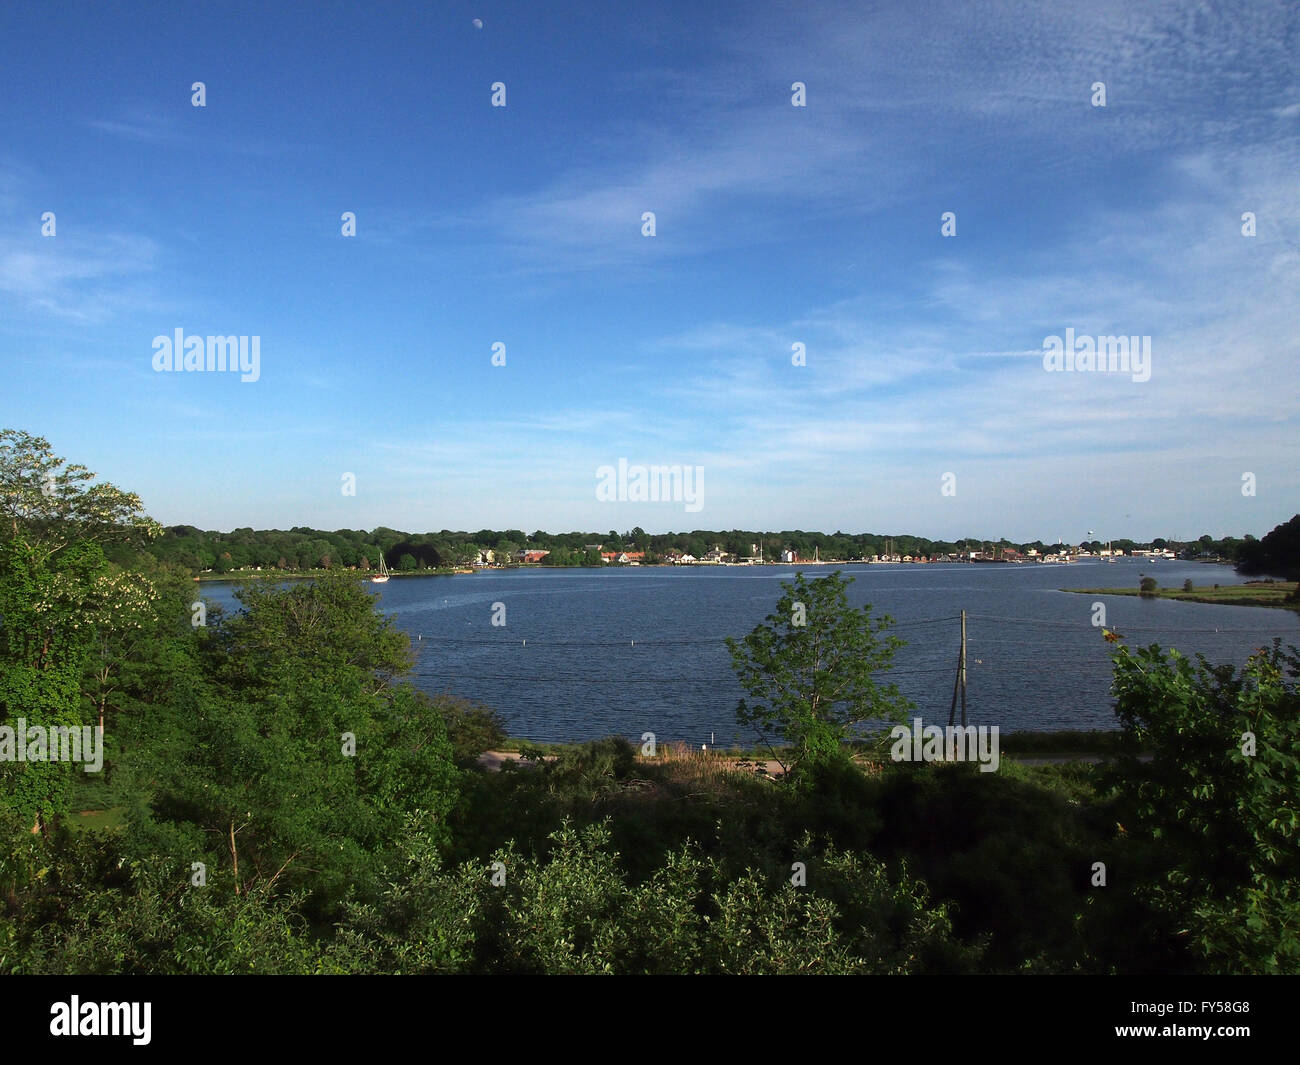 Hoxie Scenic Overlook along the 95 with view of Mystic River, trees and surrounding building in Connecticut, USA. Stock Photo